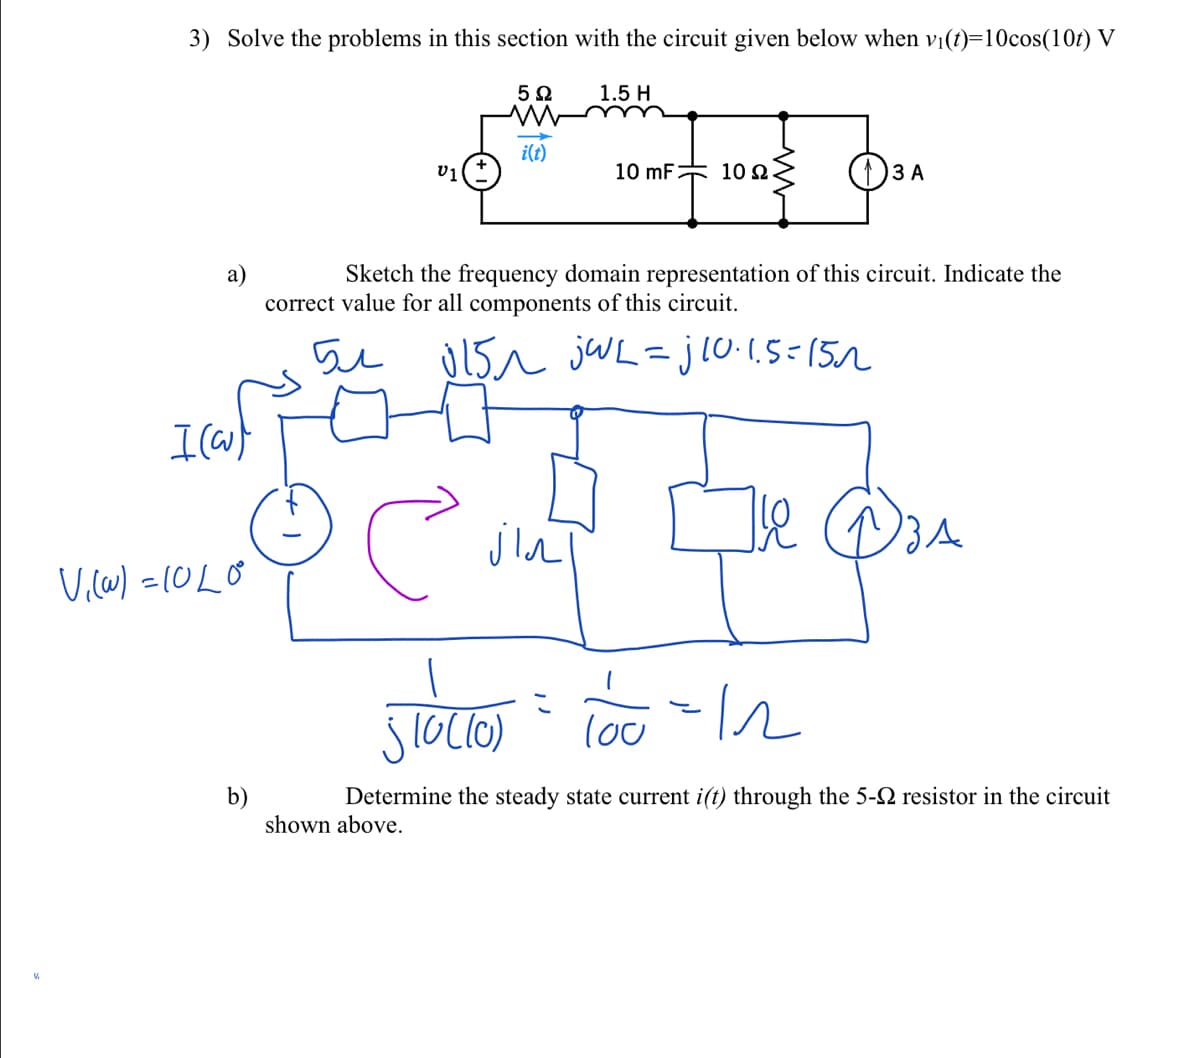 3) Solve the problems in this section with the circuit given below when vi(t)=10cos(10t) V
1.5 H
i(t)
v1
10 mF 102
()3 A
Sketch the frequency domain representation of this circuit. Indicate the
a)
correct value for all components of this circuit.
5u U15n jWL=jl0.1.5=152
lou
b)
shown above.
Determine the steady state current i(t) through the 5-2 resistor in the circuit
